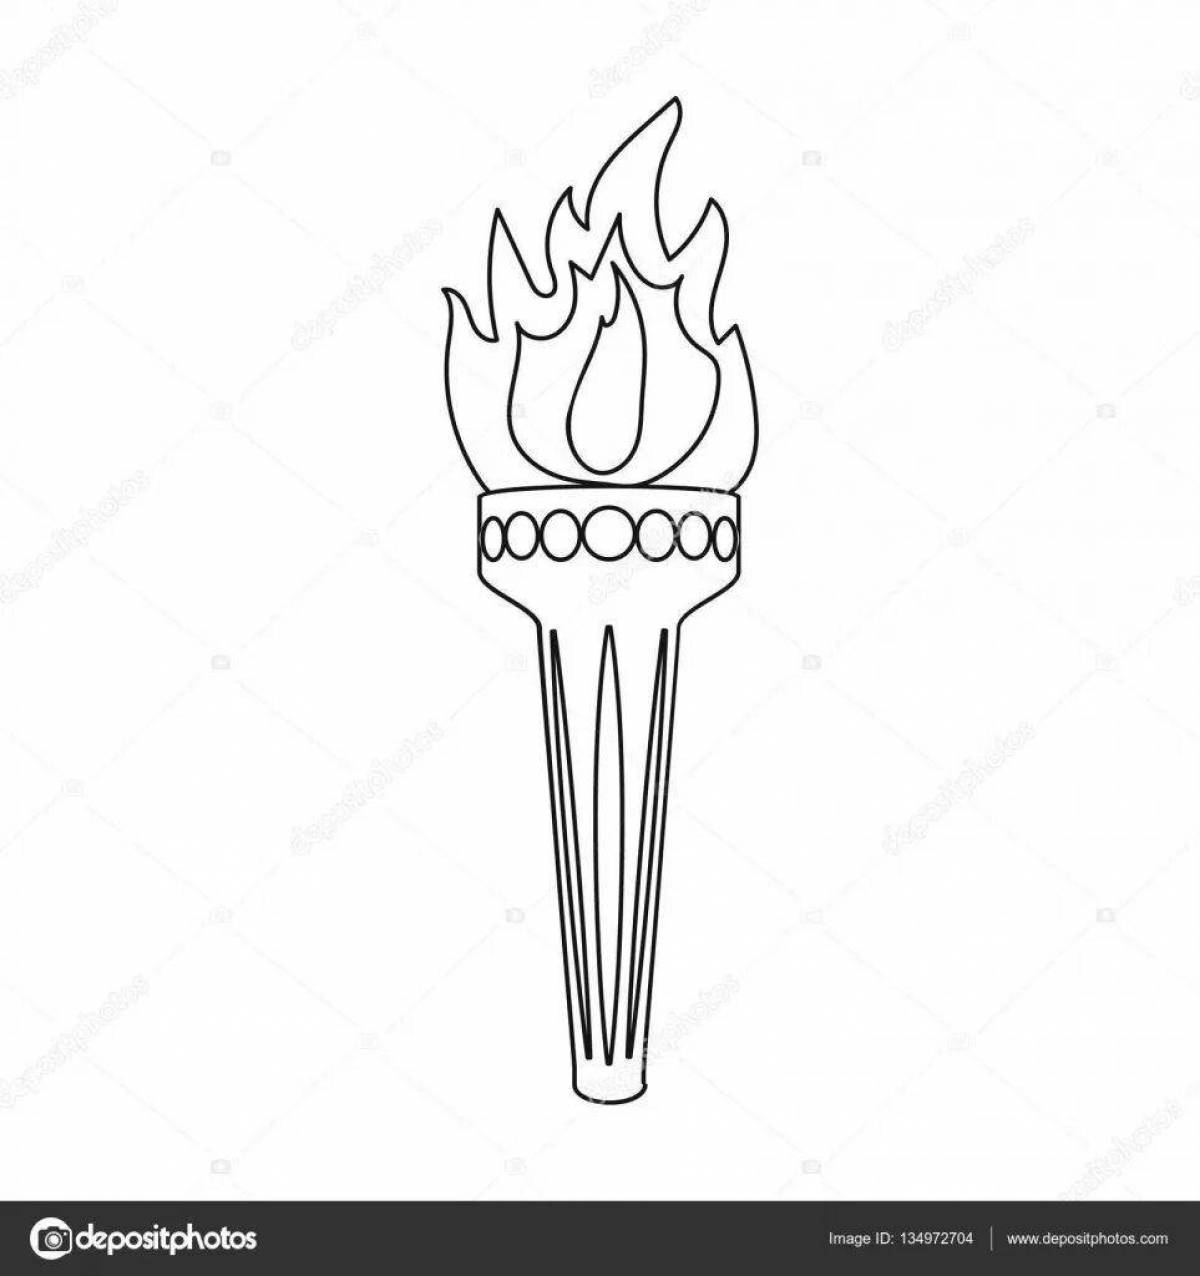 Fun torch coloring page